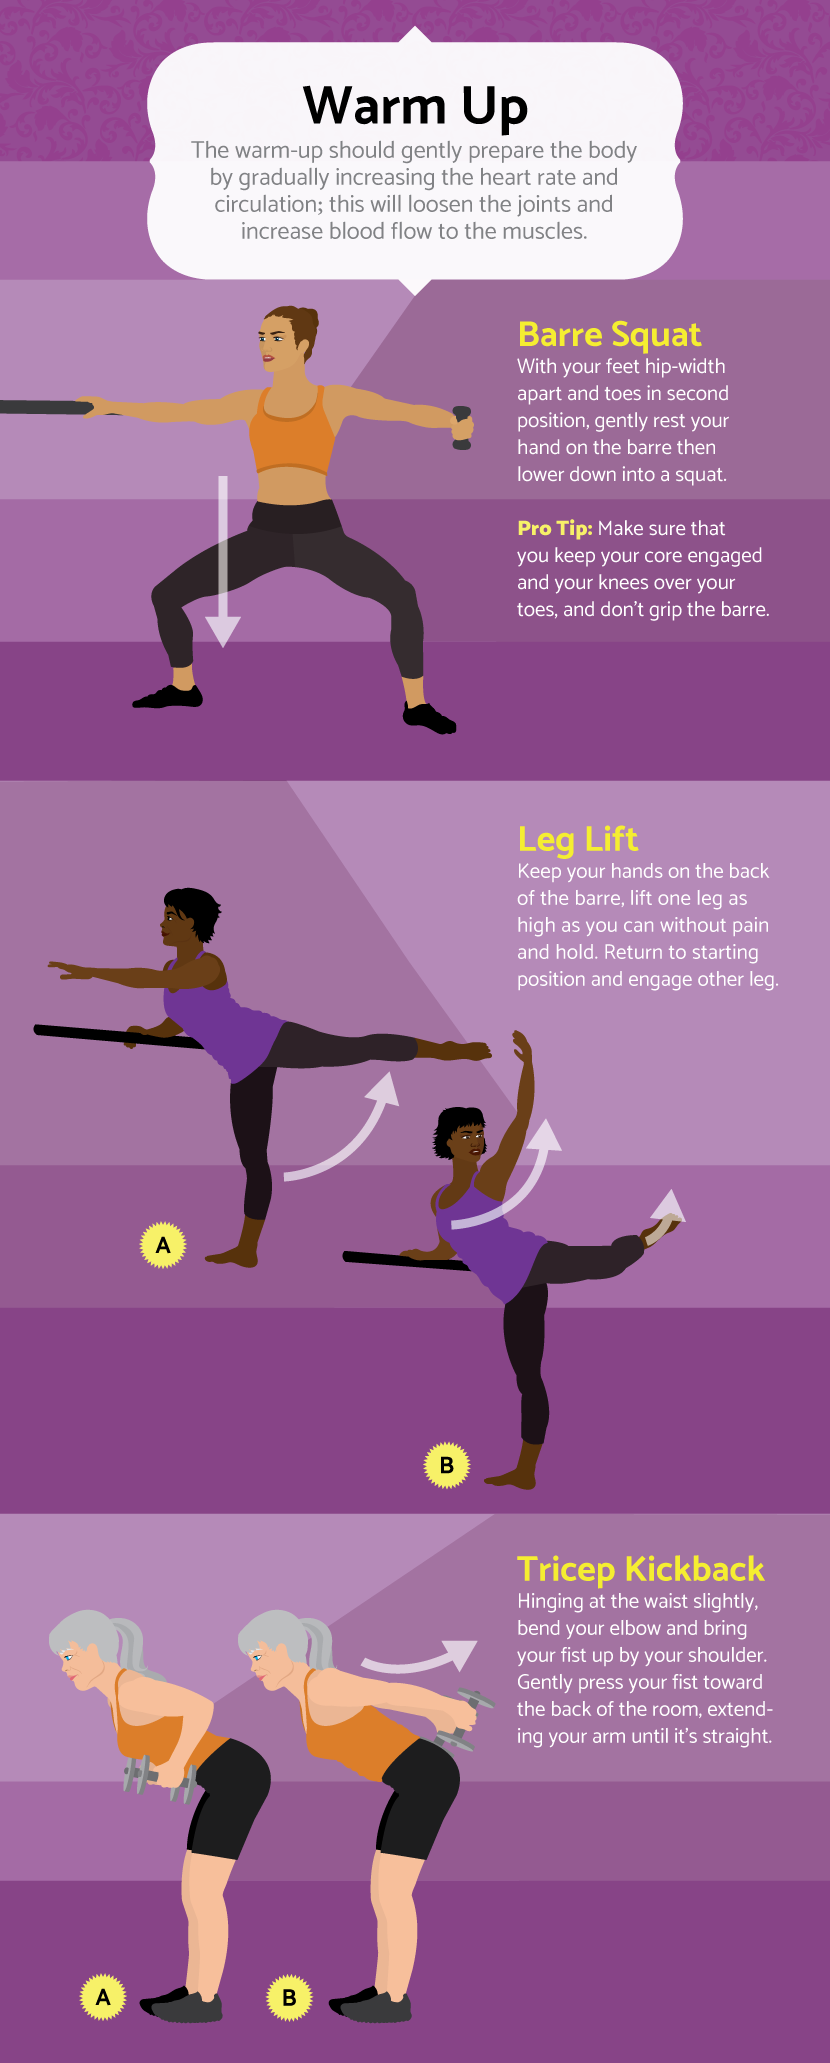 Ballet Barre Fitness: Do Barre Classes Count as Cardio?